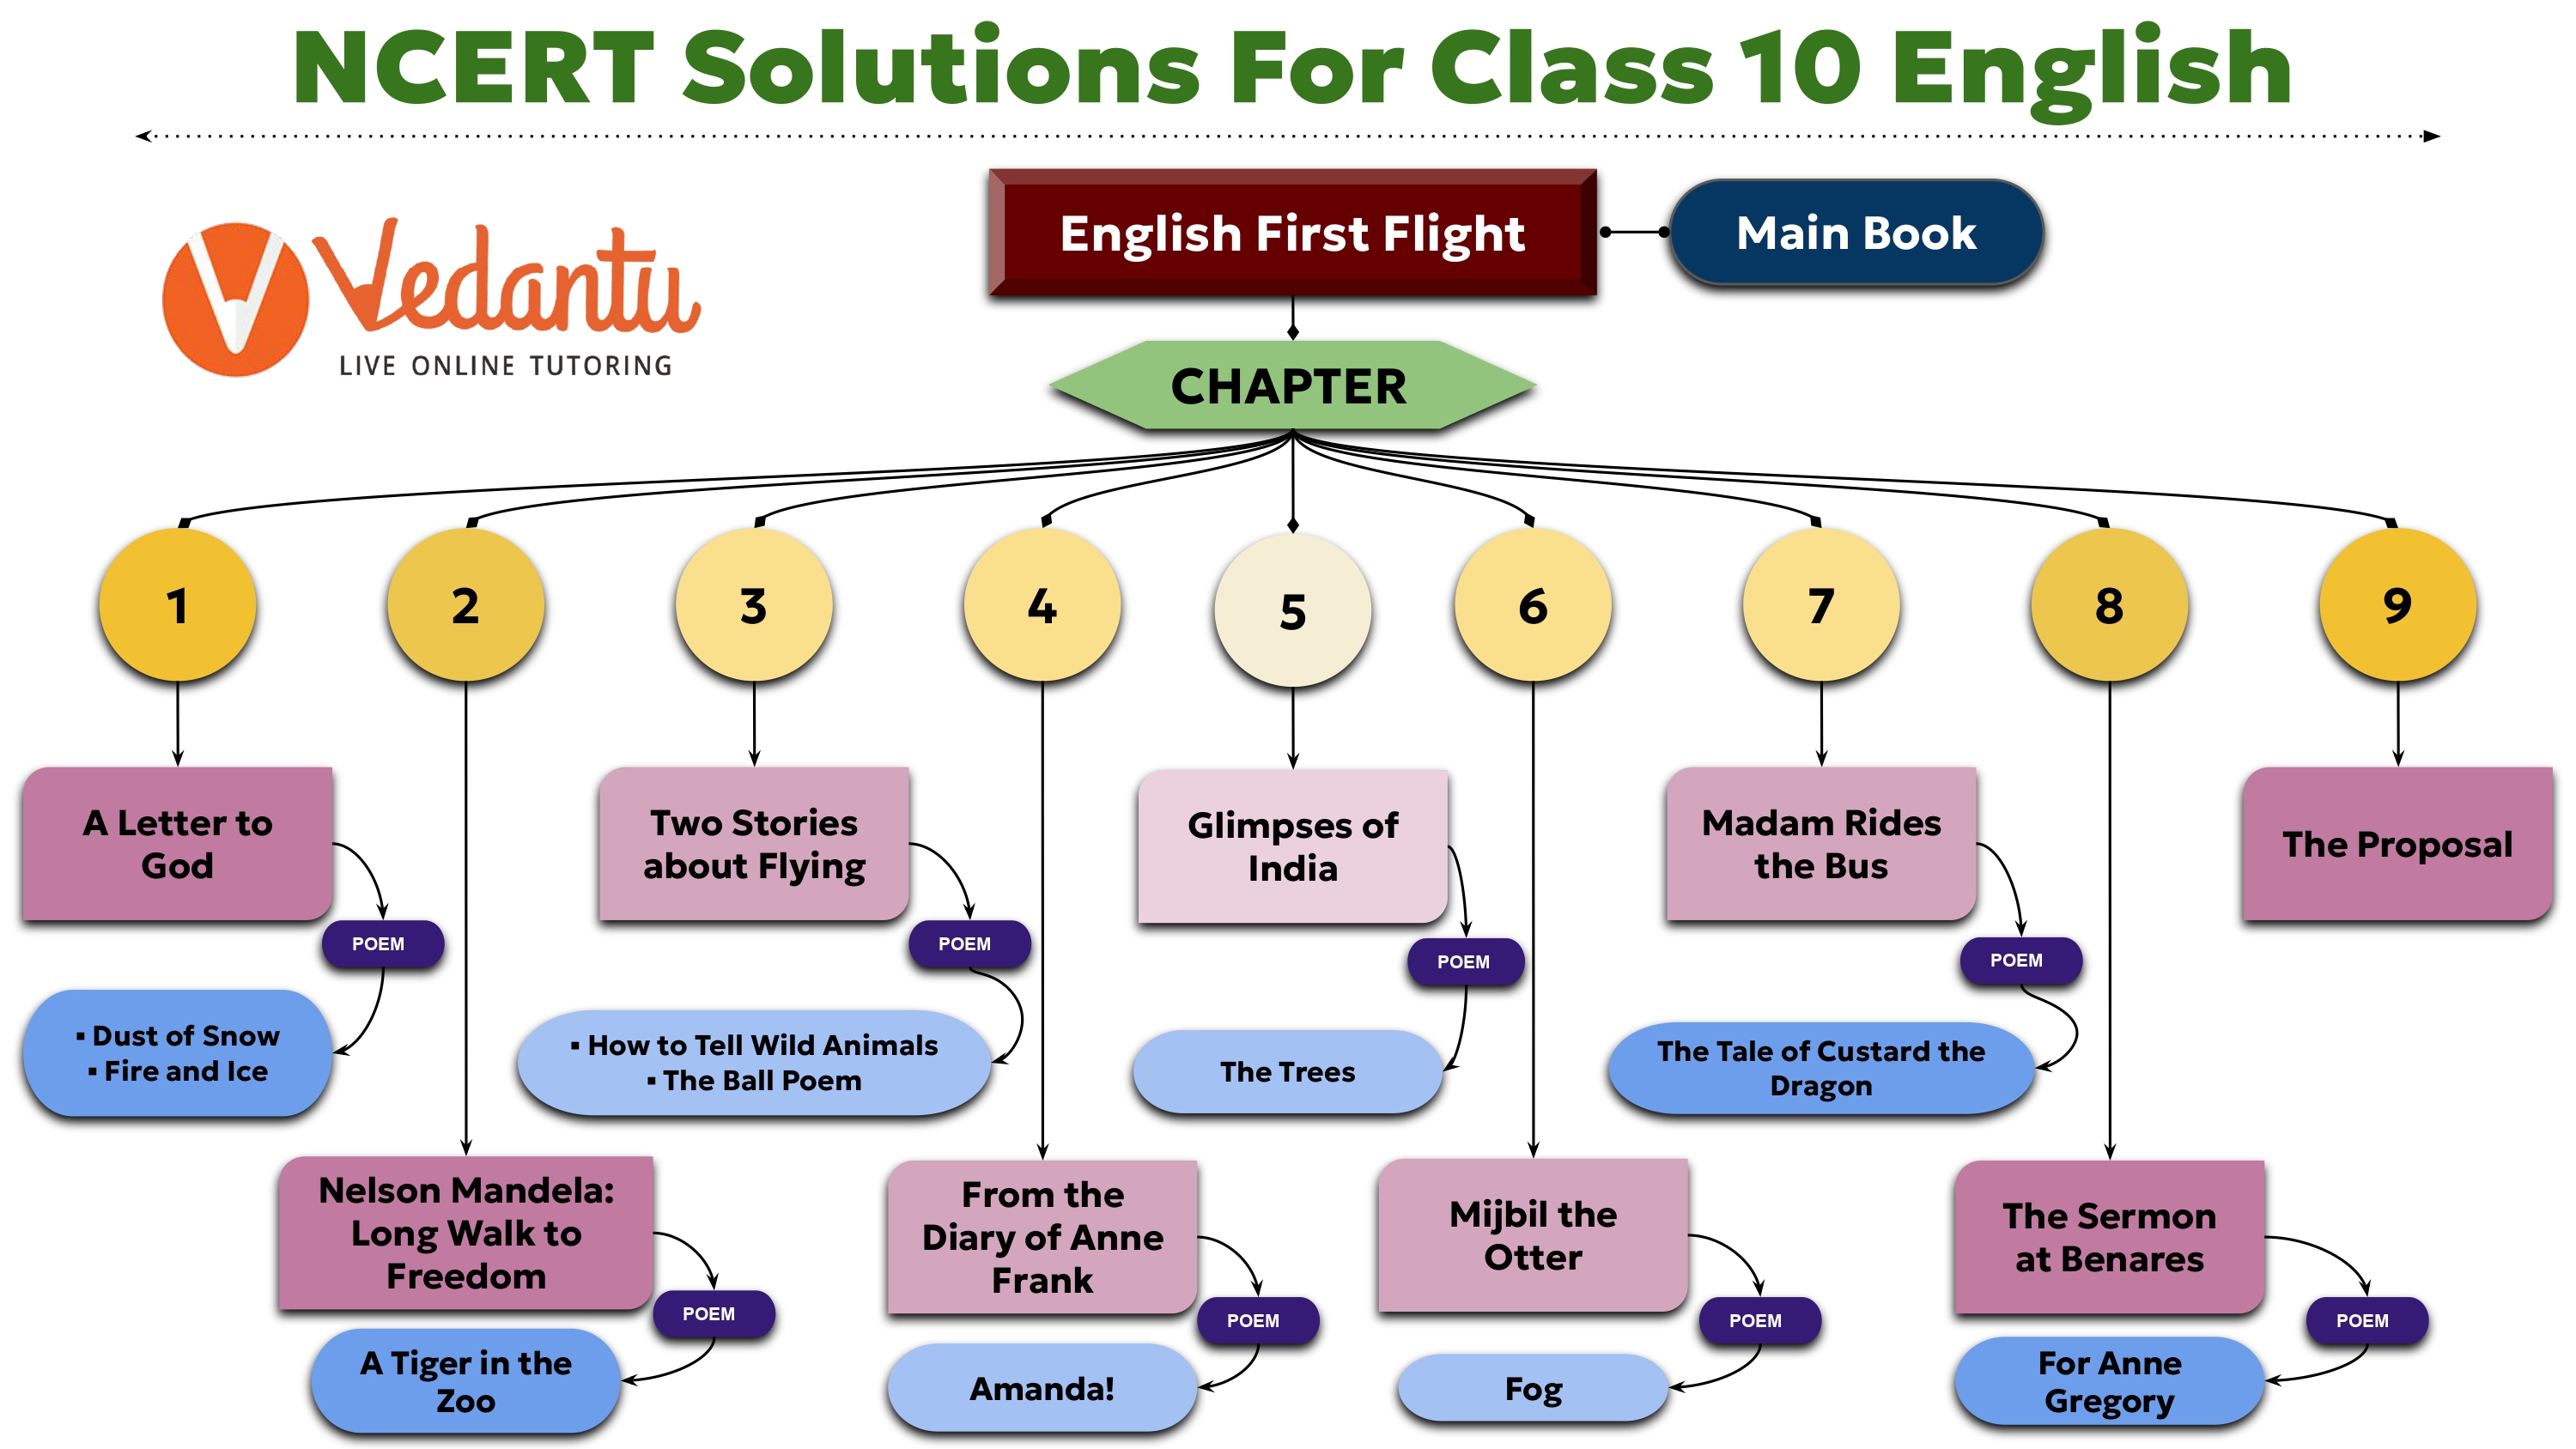 NCERT Solutions for Class 10 English - English First Flight (Main Book) with chapter-wise solutions for poems and prose